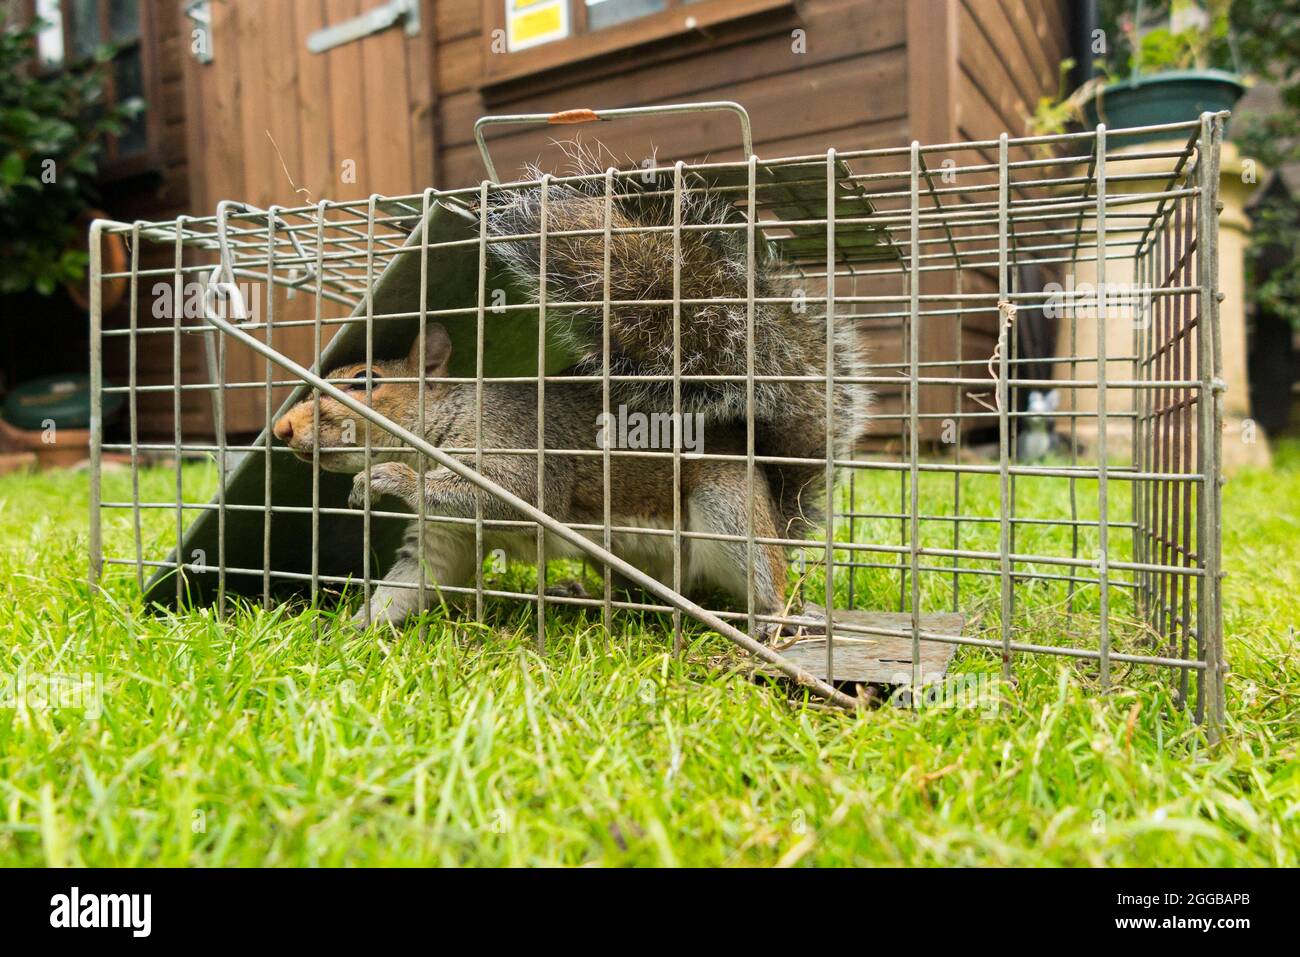 https://c8.alamy.com/comp/2GGBAPB/wild-grey-squirrel-caught-and-trapped-in-a-humane-trap-after-causing-a-nuisance-in-a-suburban-garden-by-digging-up-the-lawn-squirrels-are-a-vermin-pest-uk-127-2GGBAPB.jpg